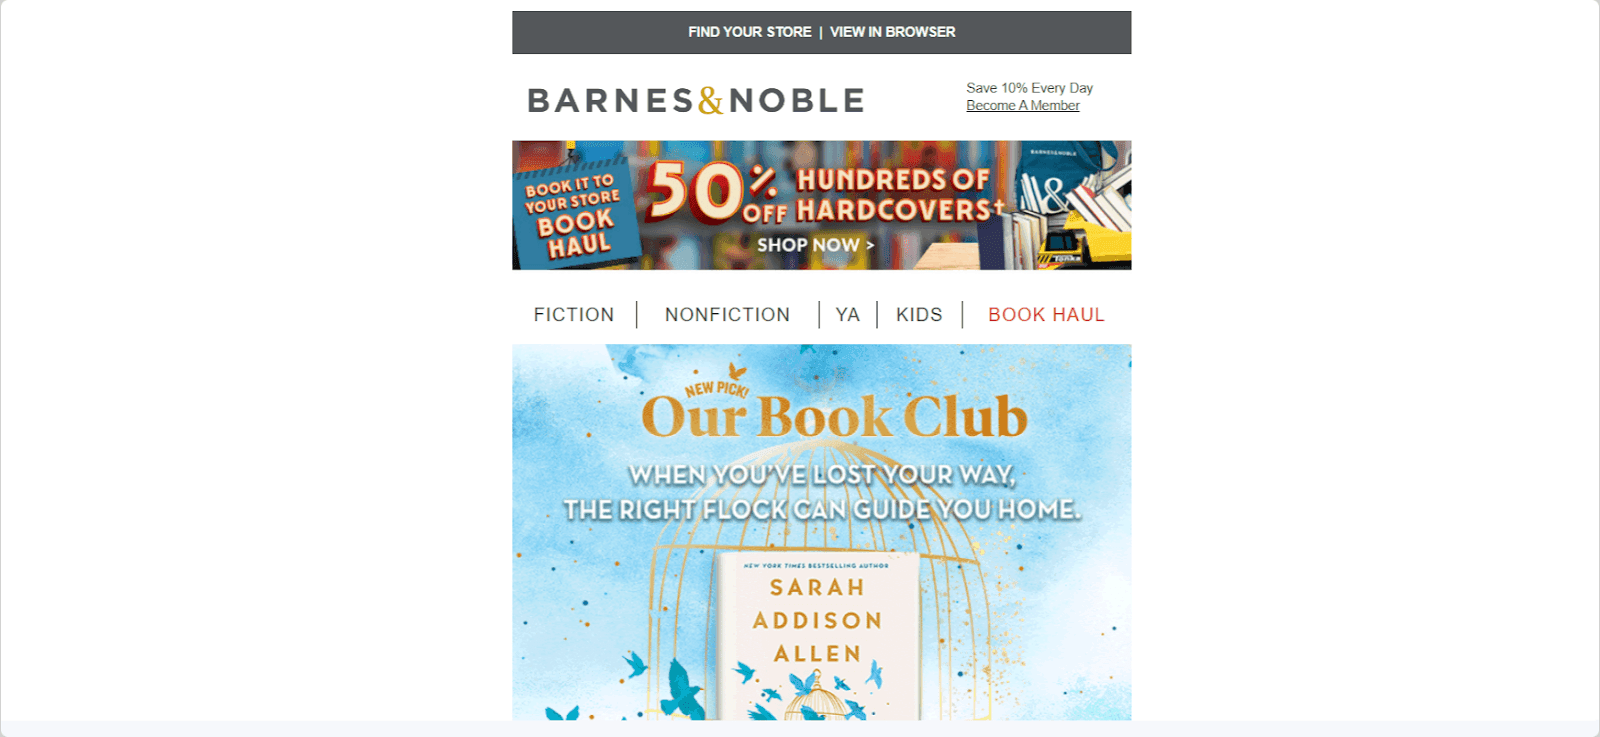 Barnes & Noble promotion email